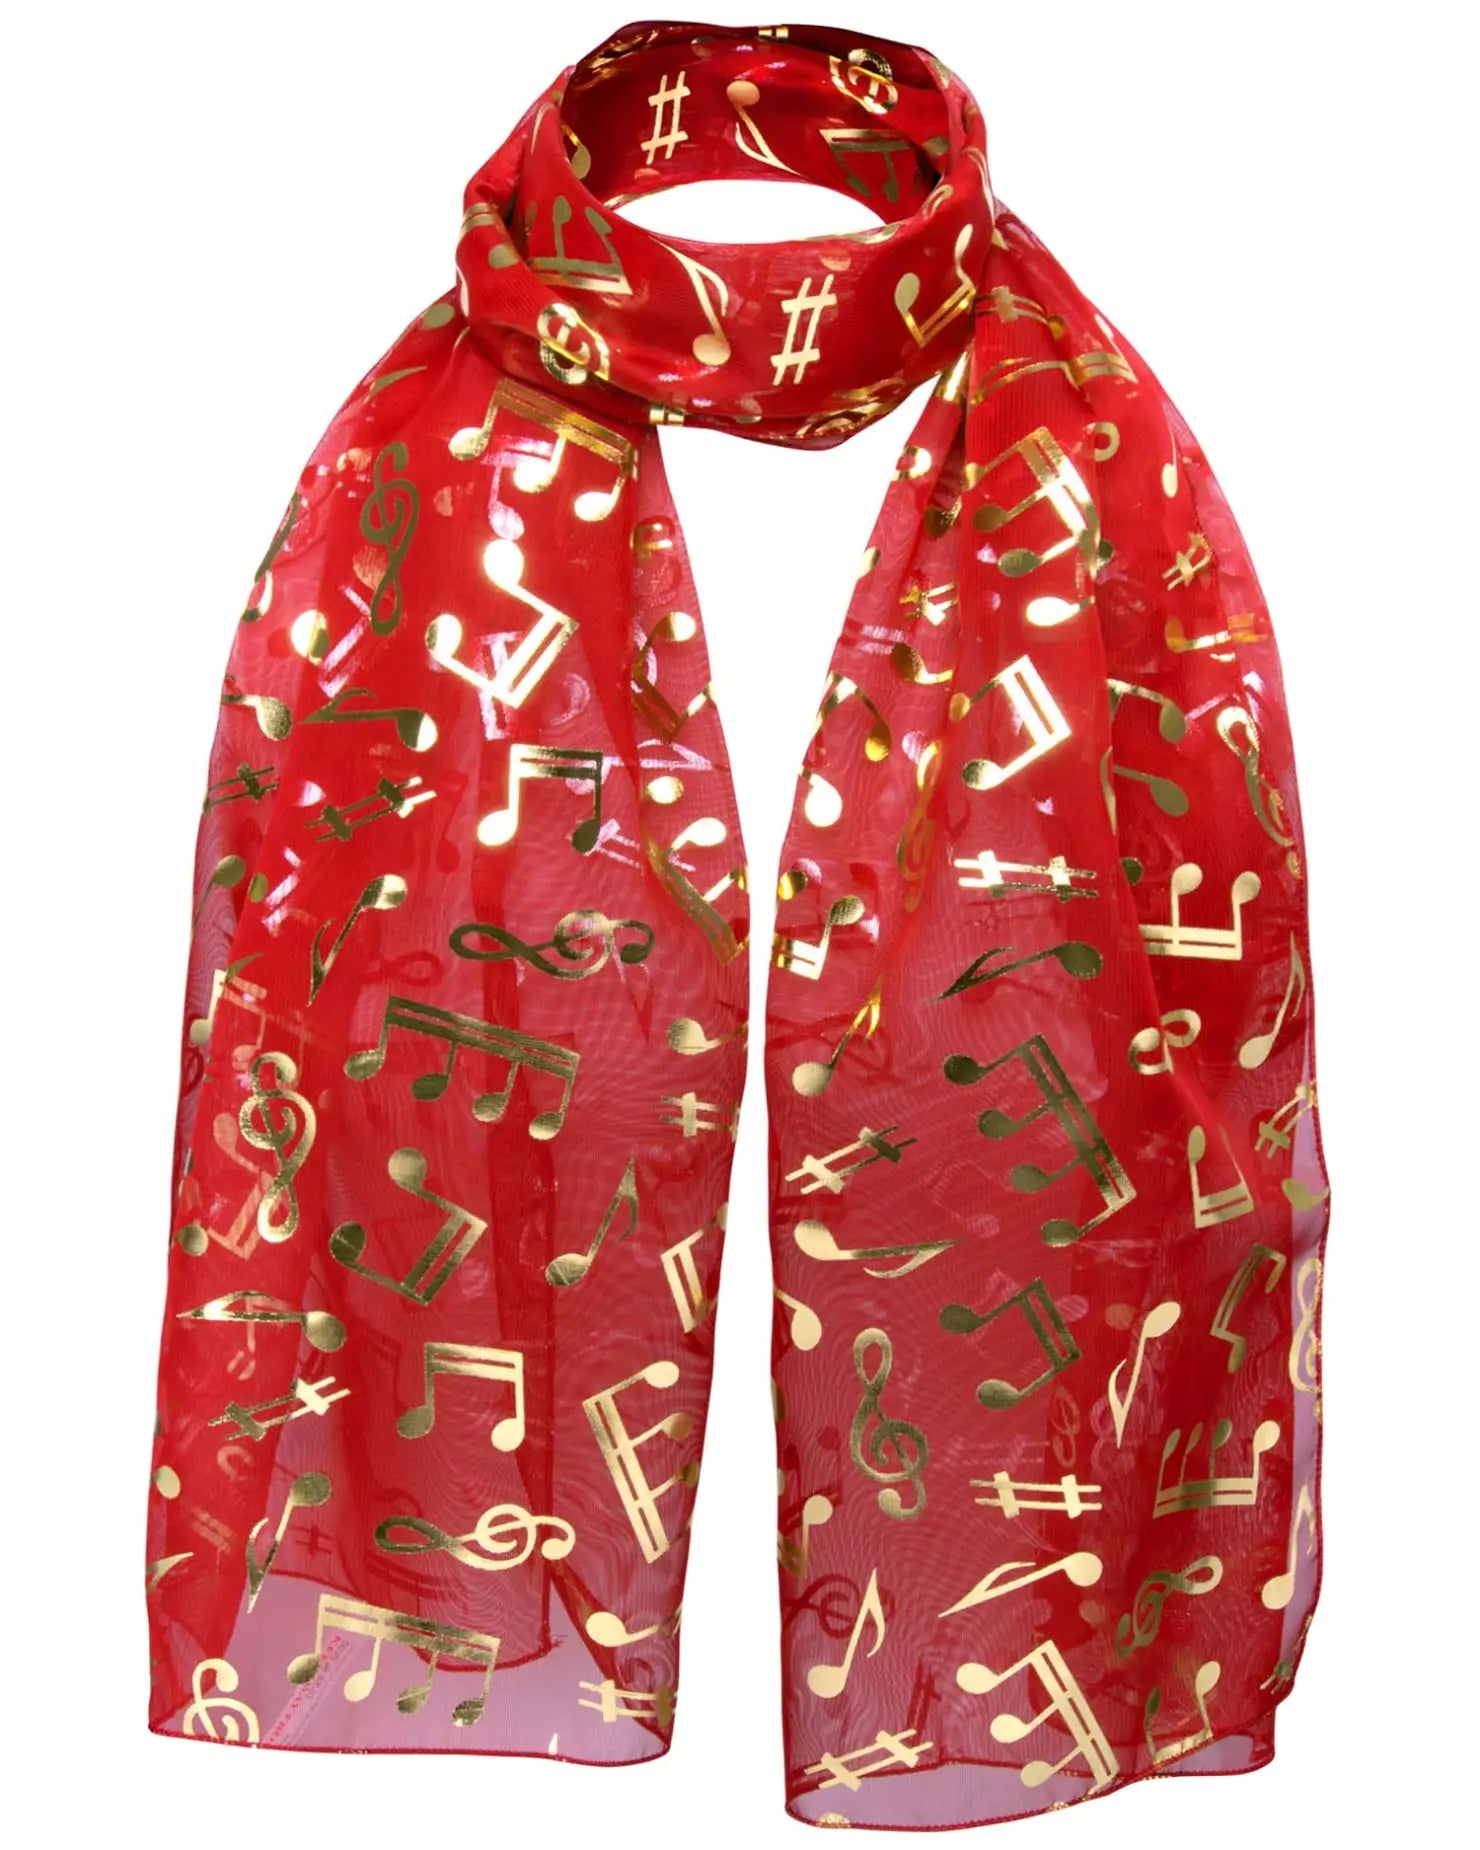 Red scarf with gold foil music notes from Gold Foil Music Note Chiffon Group Scarf.